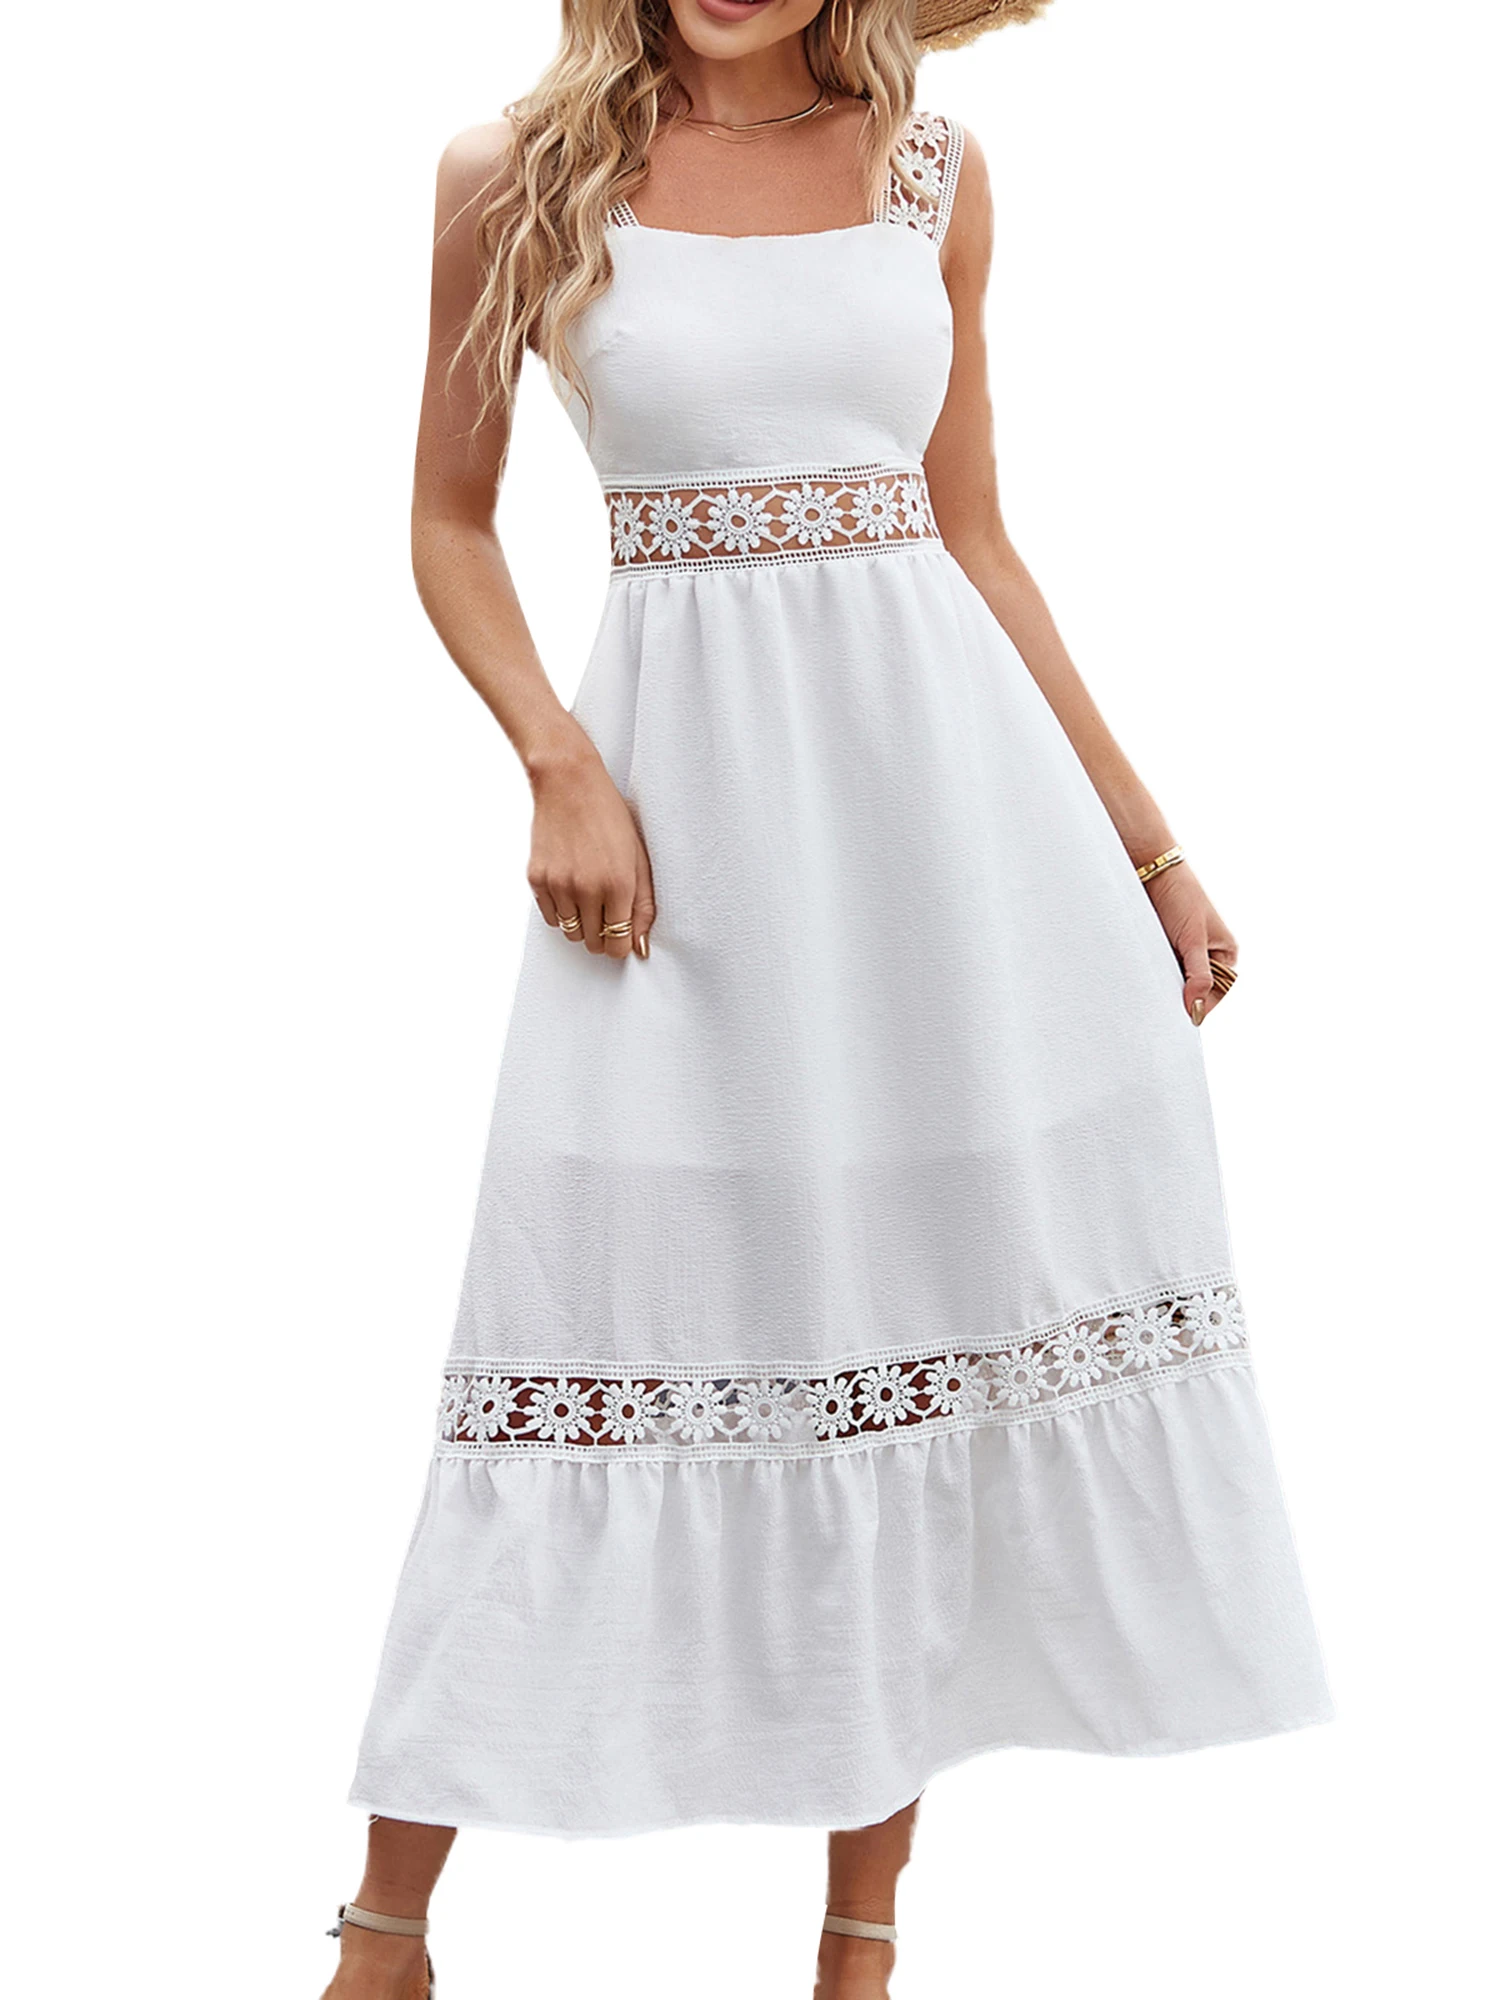 

Women s Elegant Lace Patchwork A-Line Maxi Dress with Square Neckline and Cutout Details - Perfect for Cocktail Parties Beach